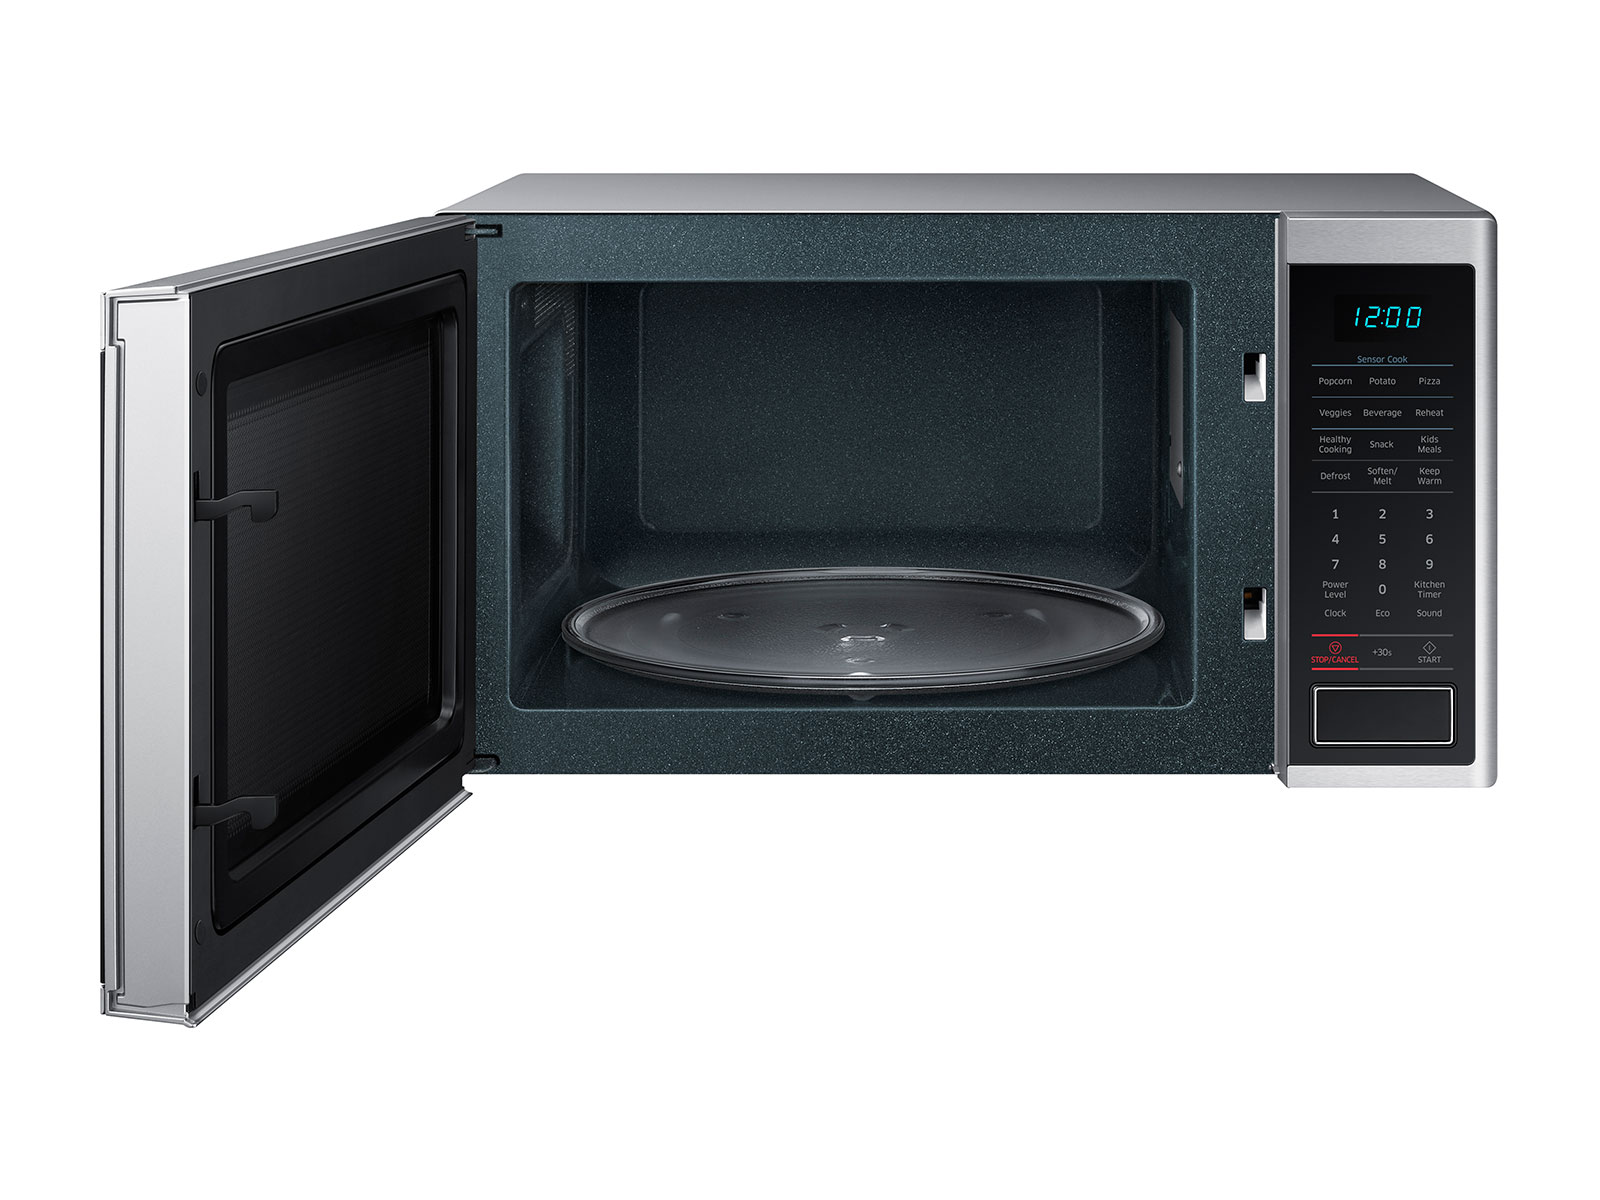 21 Inch Wide Countertop Microwaves at